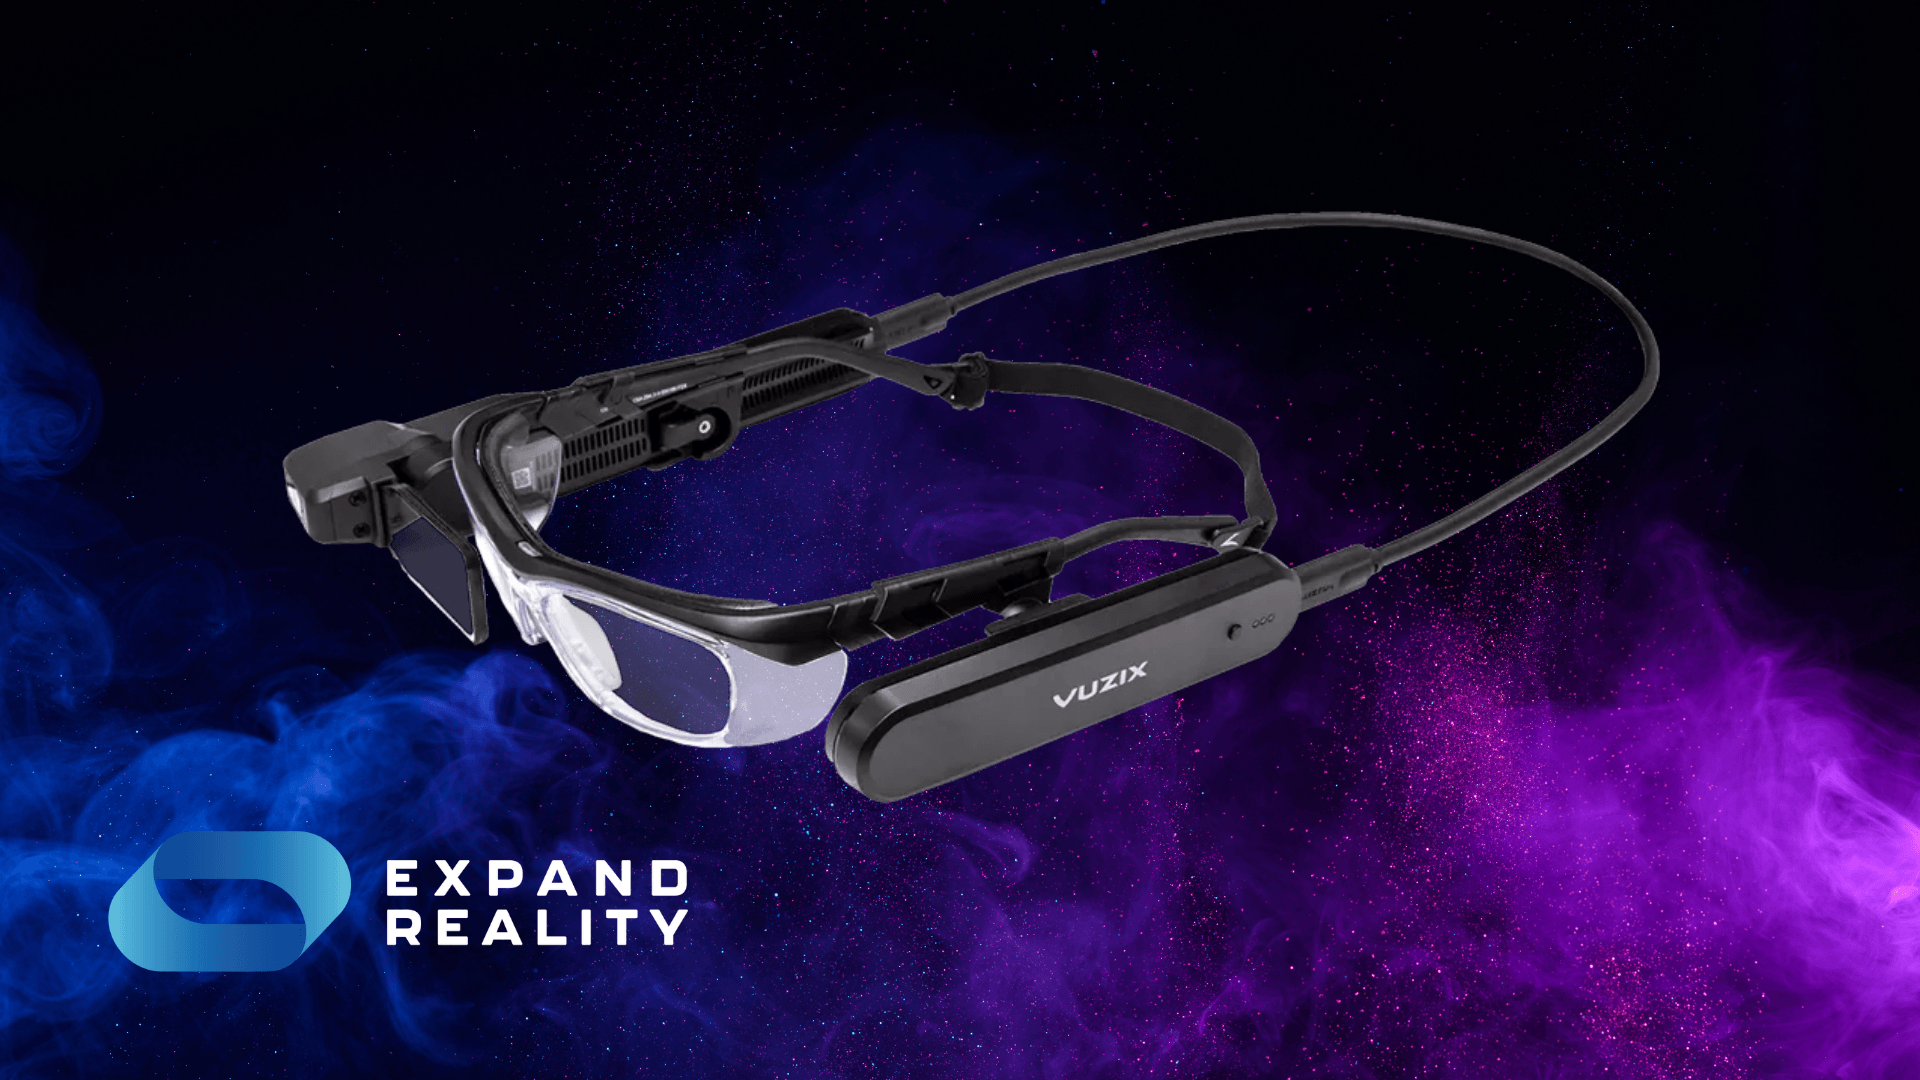 What is the Vuzix M4000 and how can it help your business? Discover the specs, facts and features in this XR product analysis.